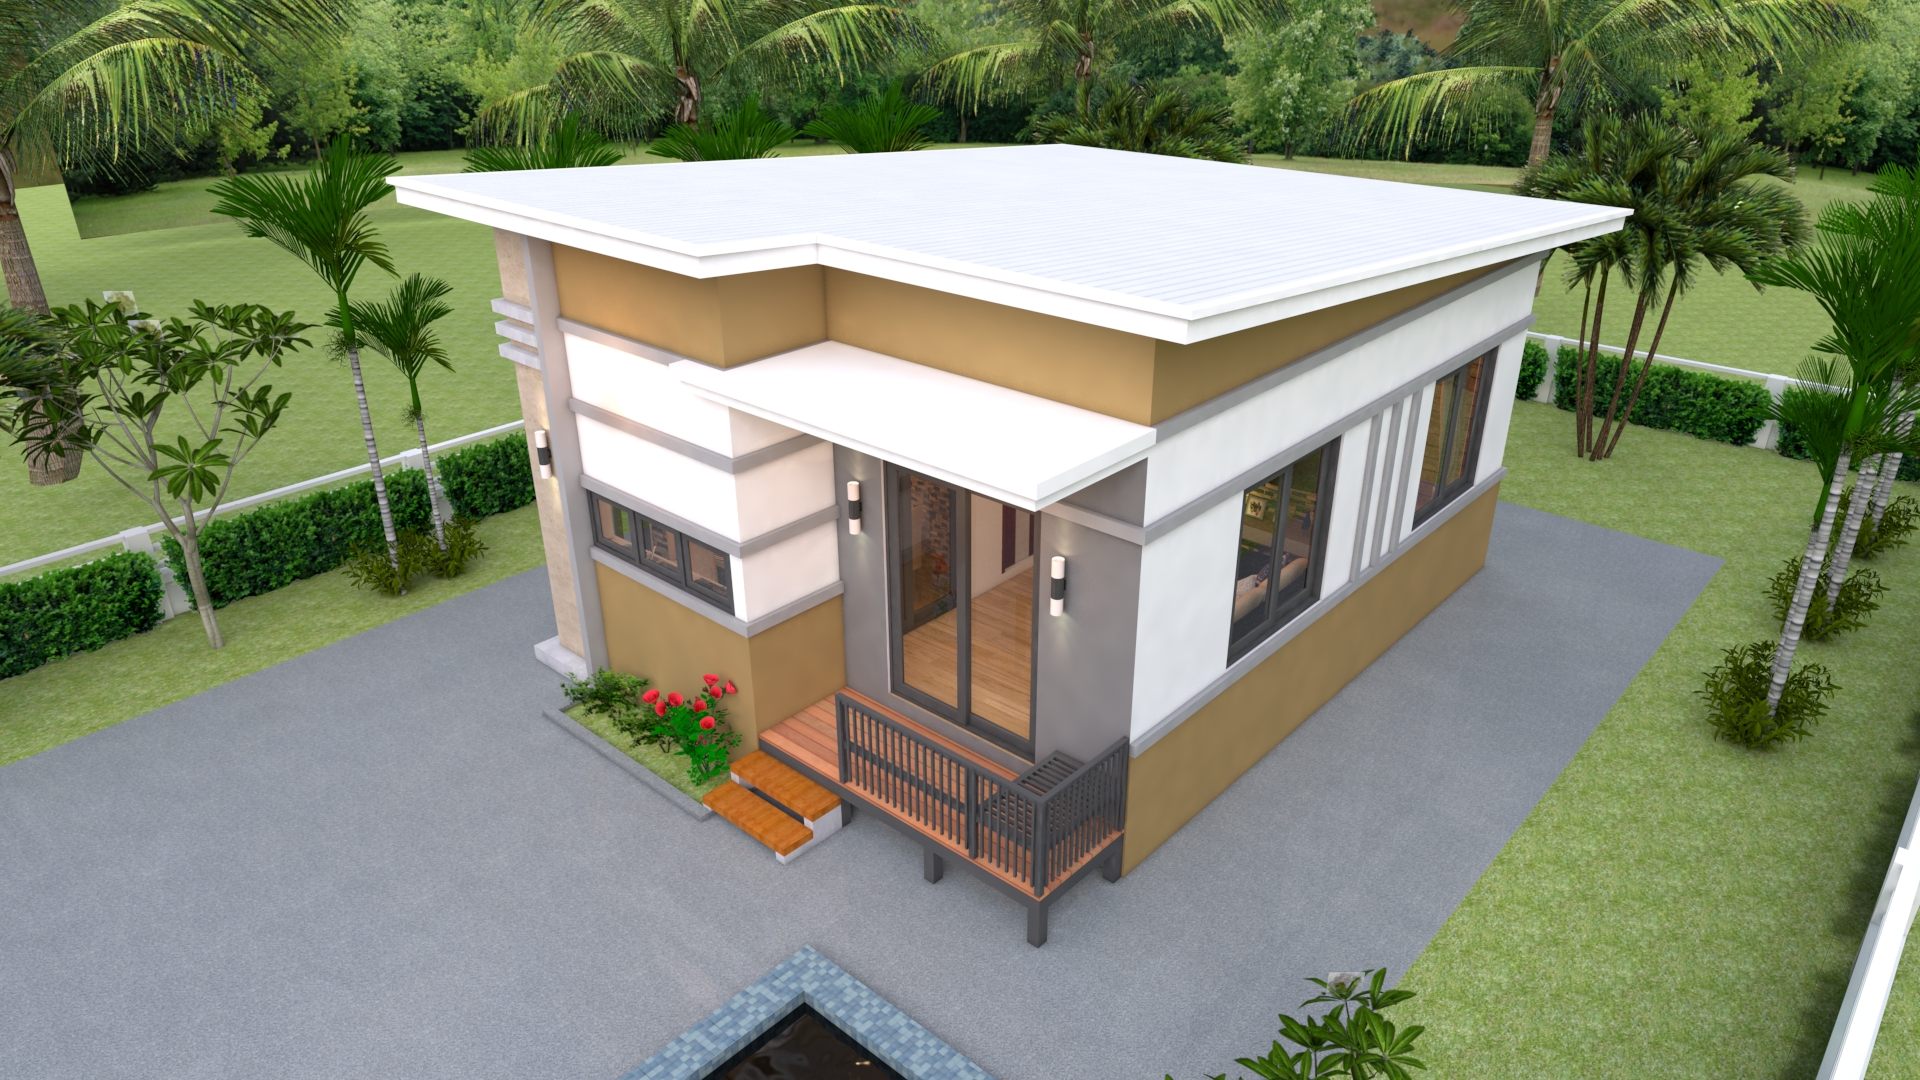 House Design 3d 6x8 Meter 20x26 Feet 2 Bedrooms Shed Roof